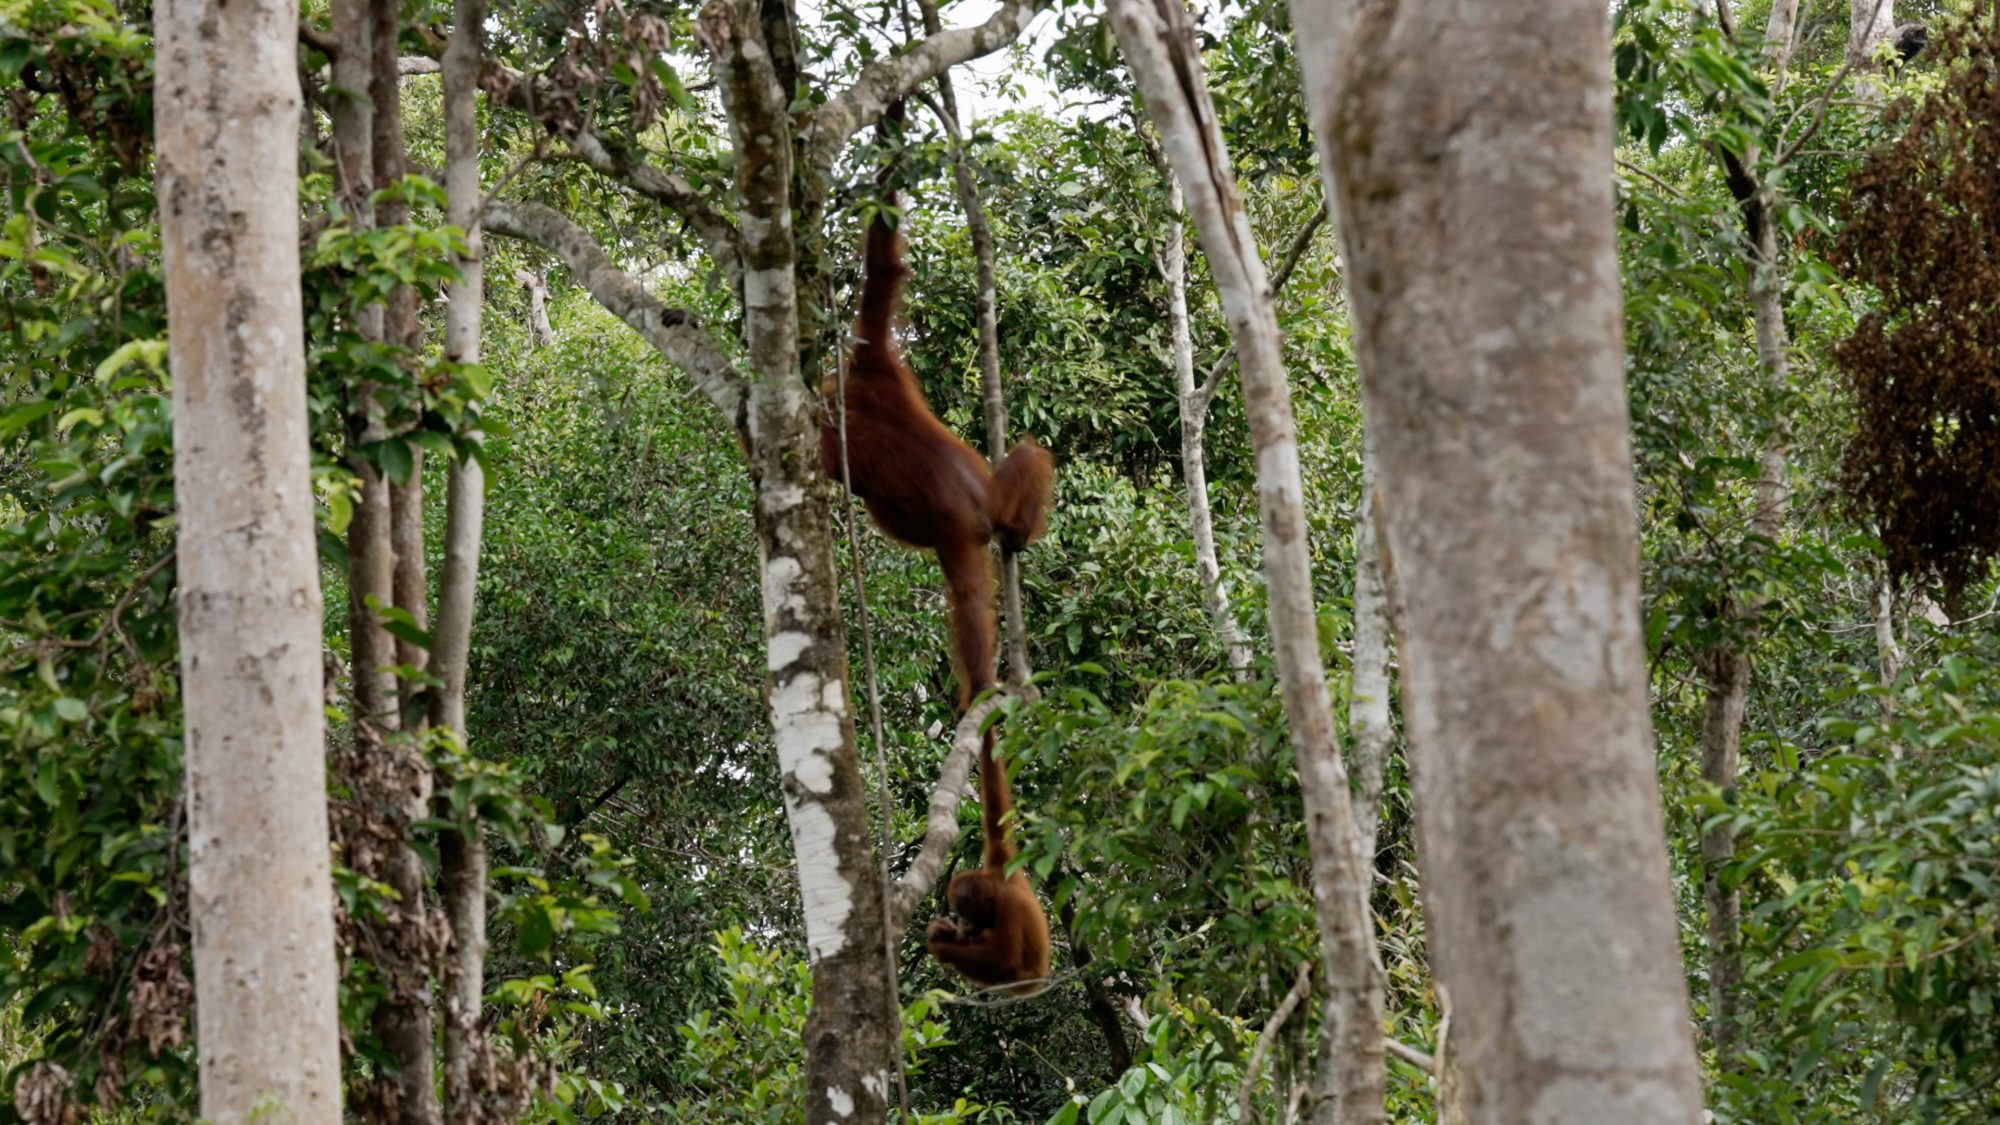 Young Orangutan plays by swinging from a tree – Borneo 2023